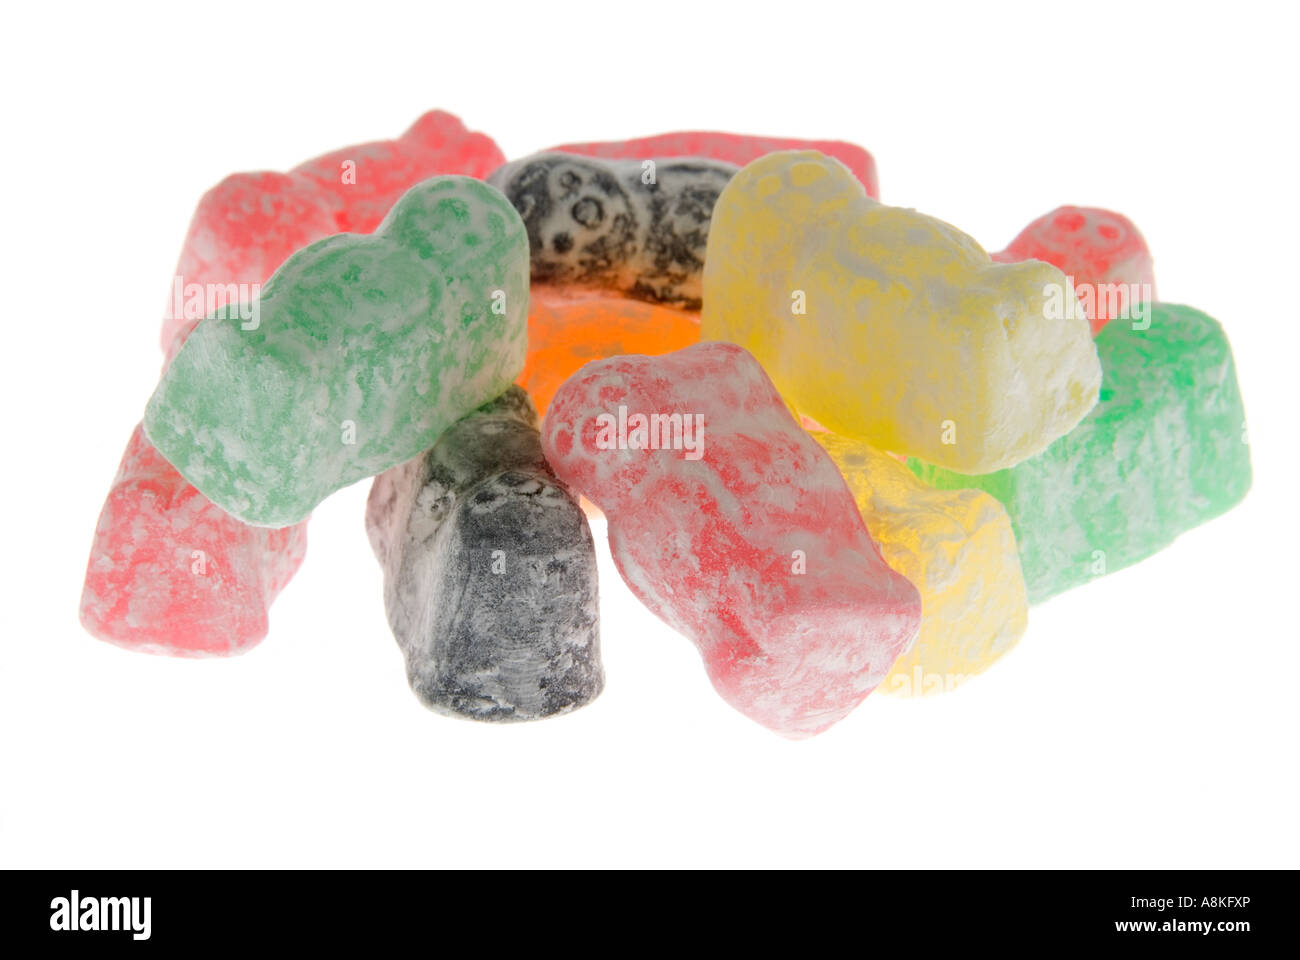 Horizontal close up of a pile of powdery multi coloured jelly babies on a white background Stock Photo